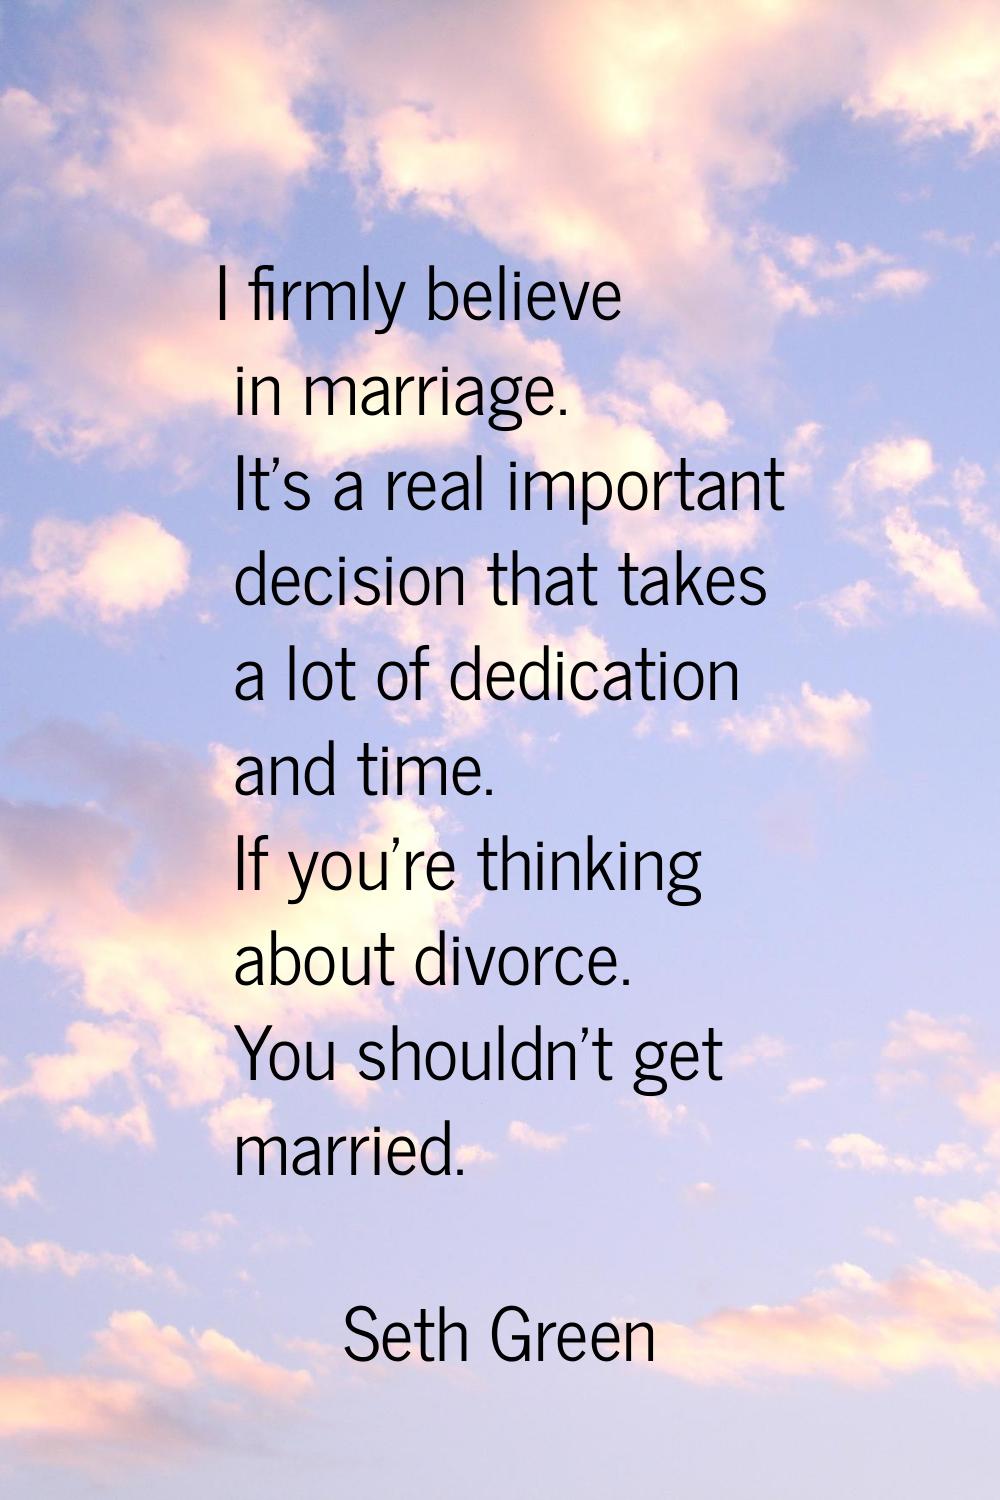 I firmly believe in marriage. It's a real important decision that takes a lot of dedication and tim